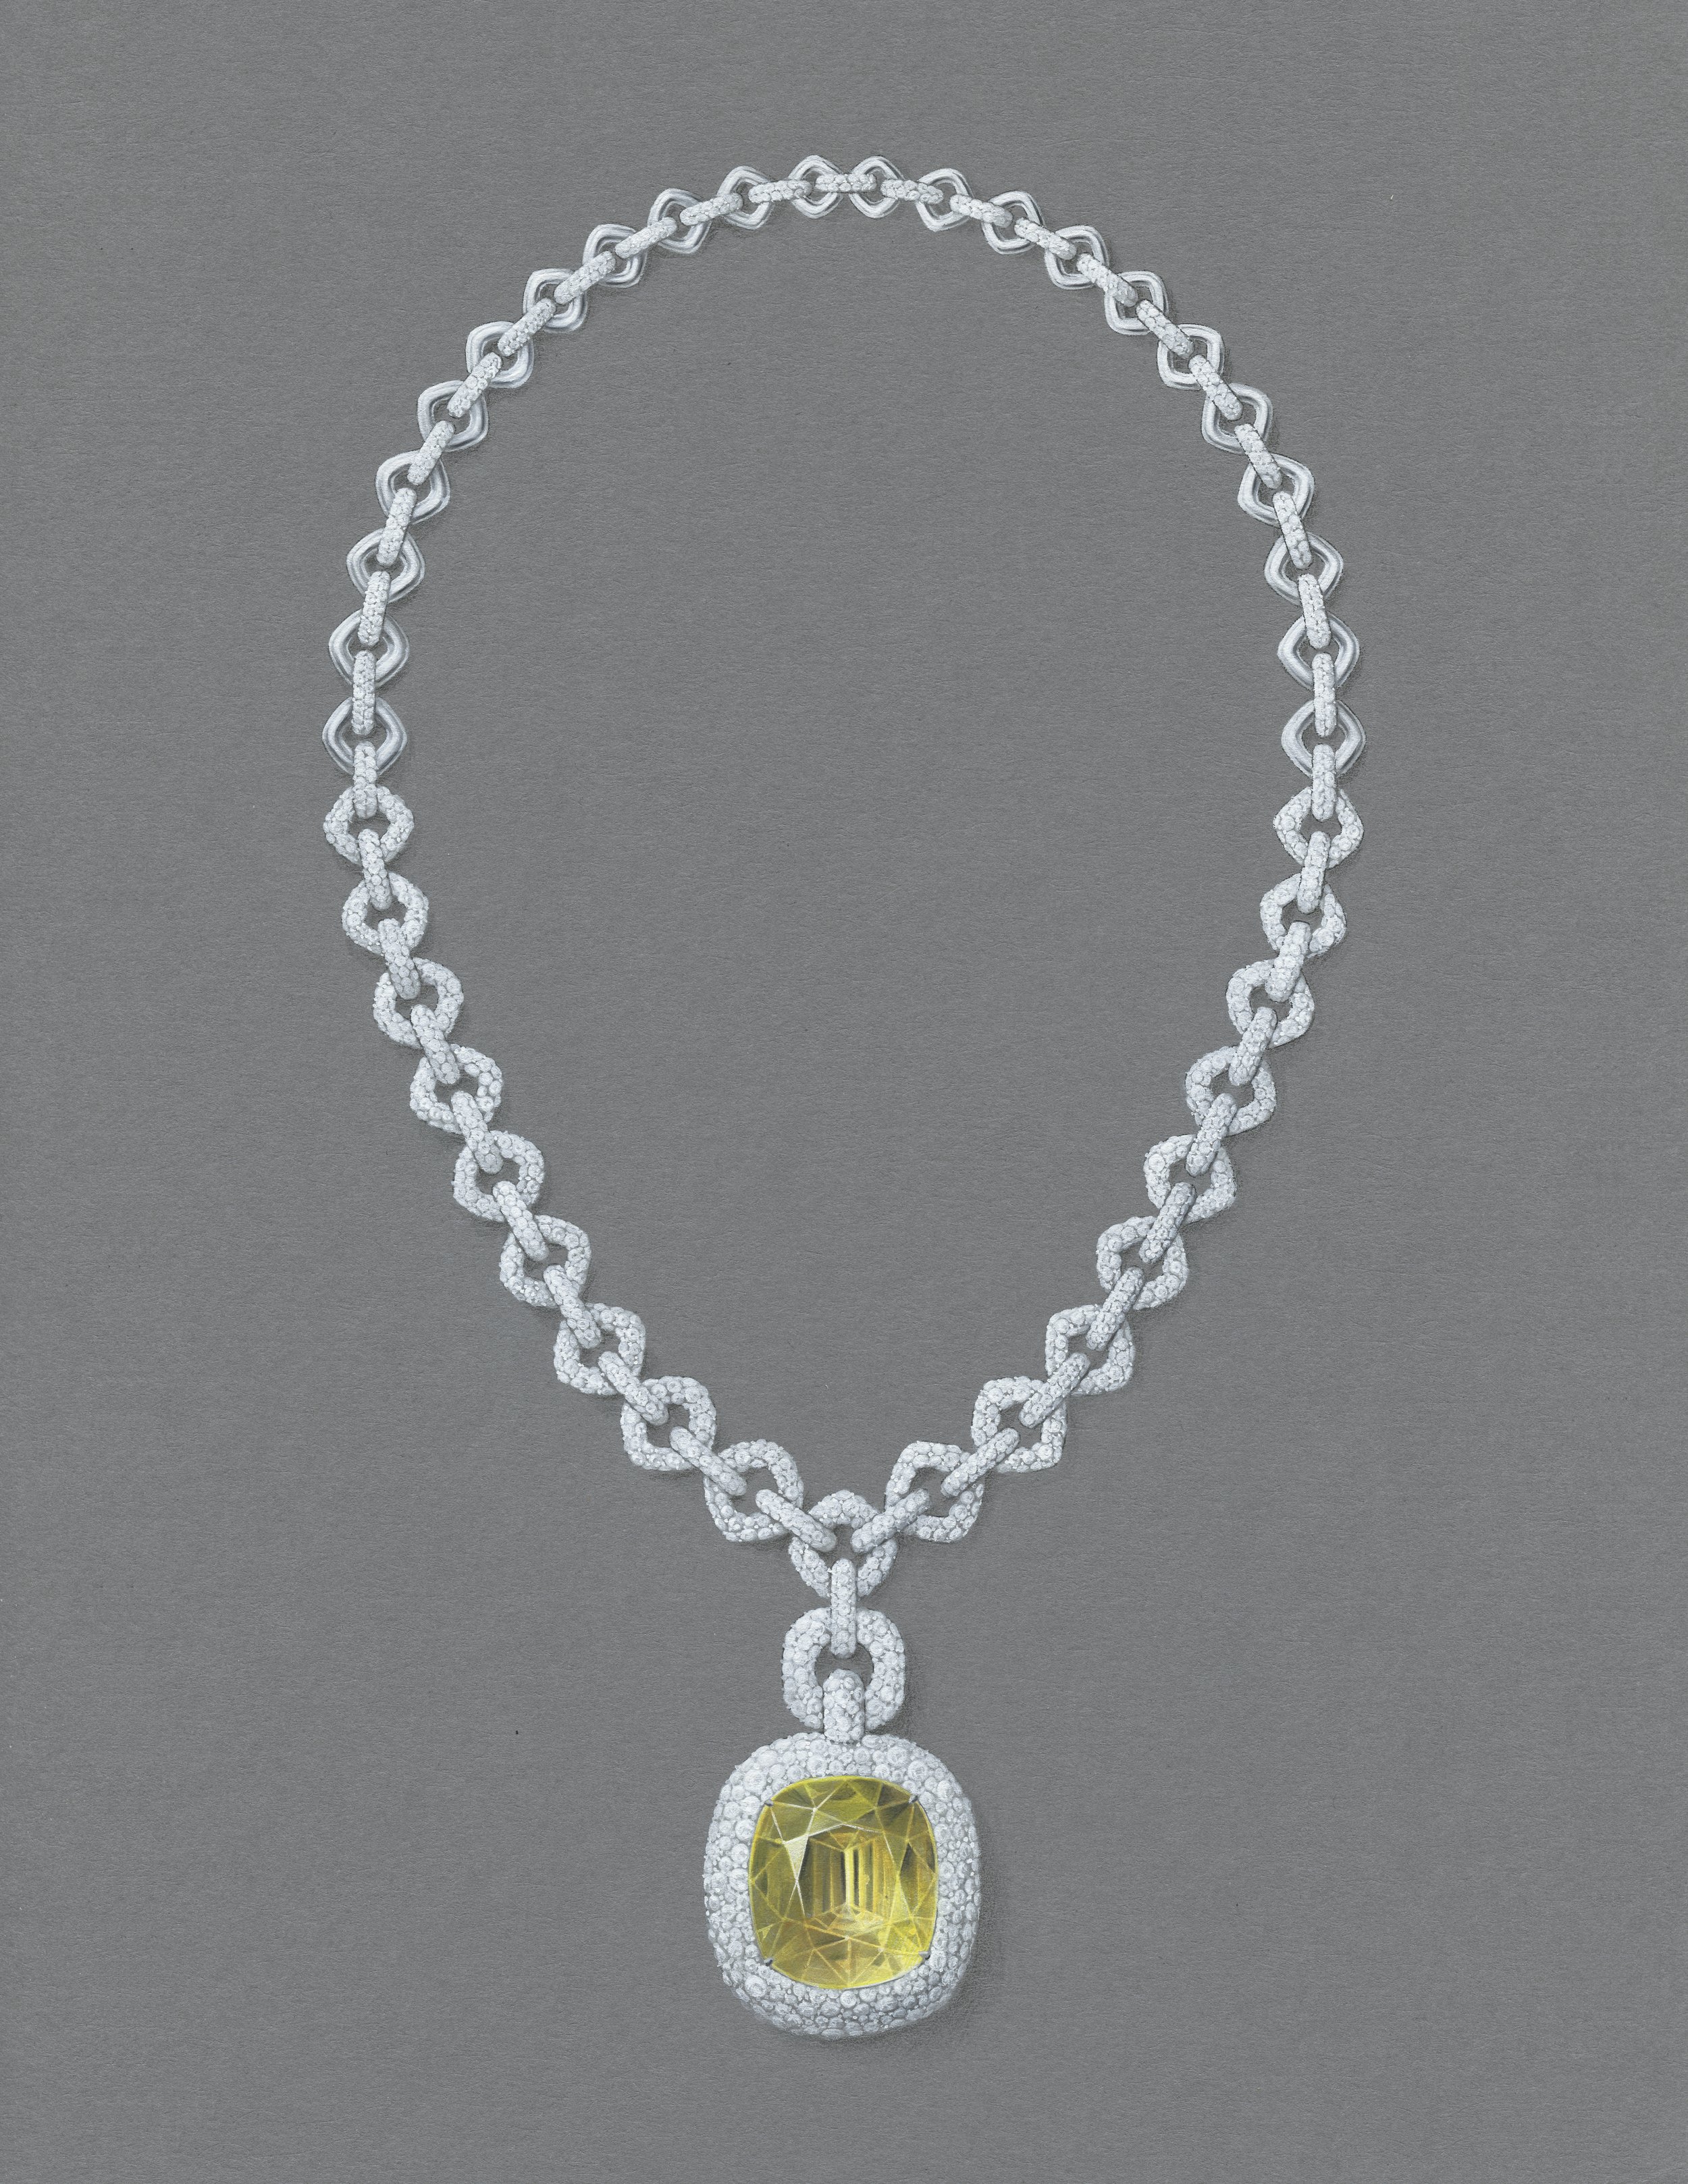  Gouache painting of a yellow beryl pendant necklace with white diamond pave set in 18k white gold. 